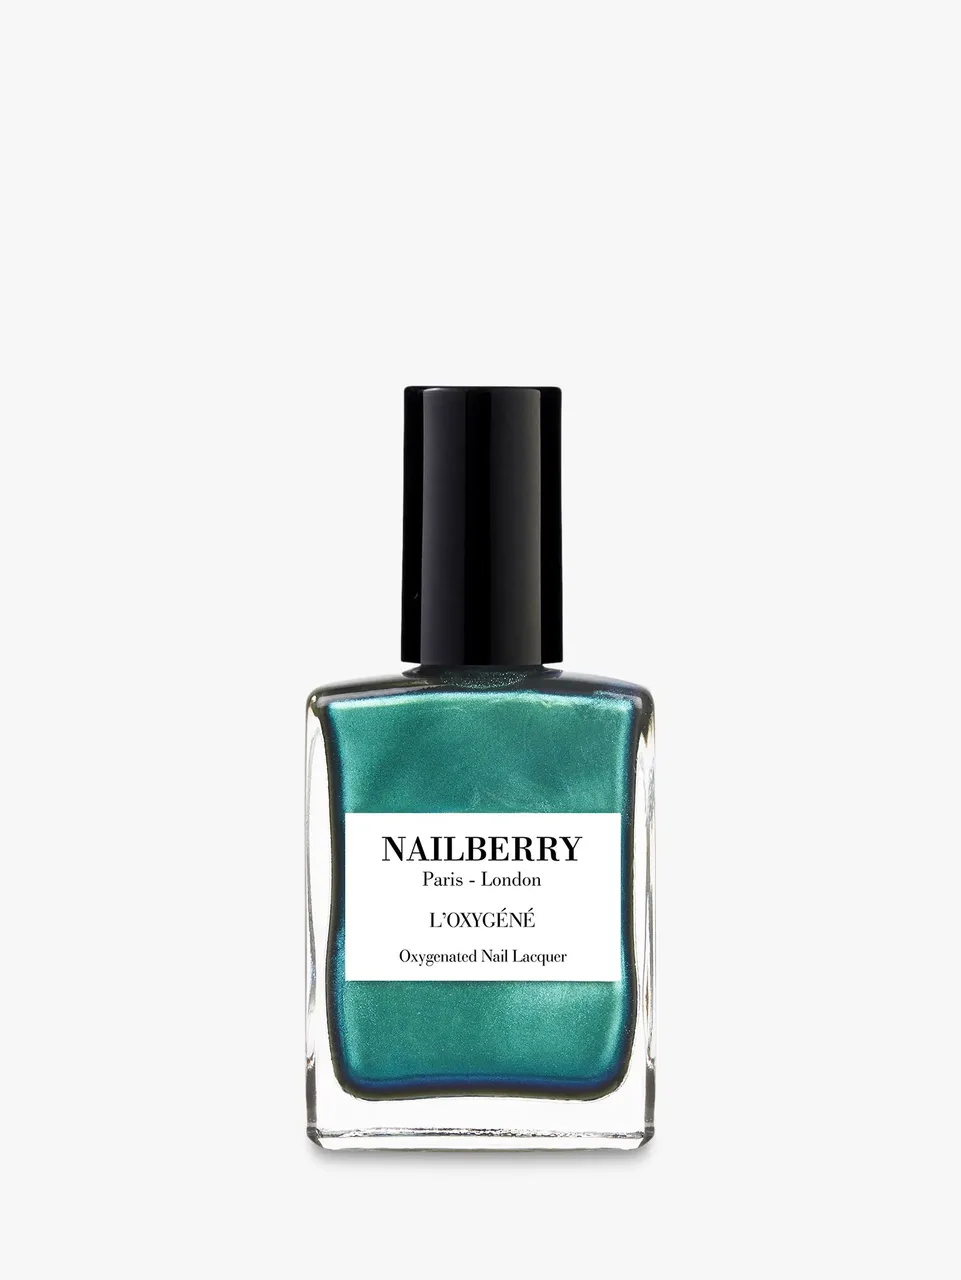 Nailberry L'OxygÃ©nÃ© Oxygenated Nail Lacquer - Glamazon - Unisex - Size: 15ml